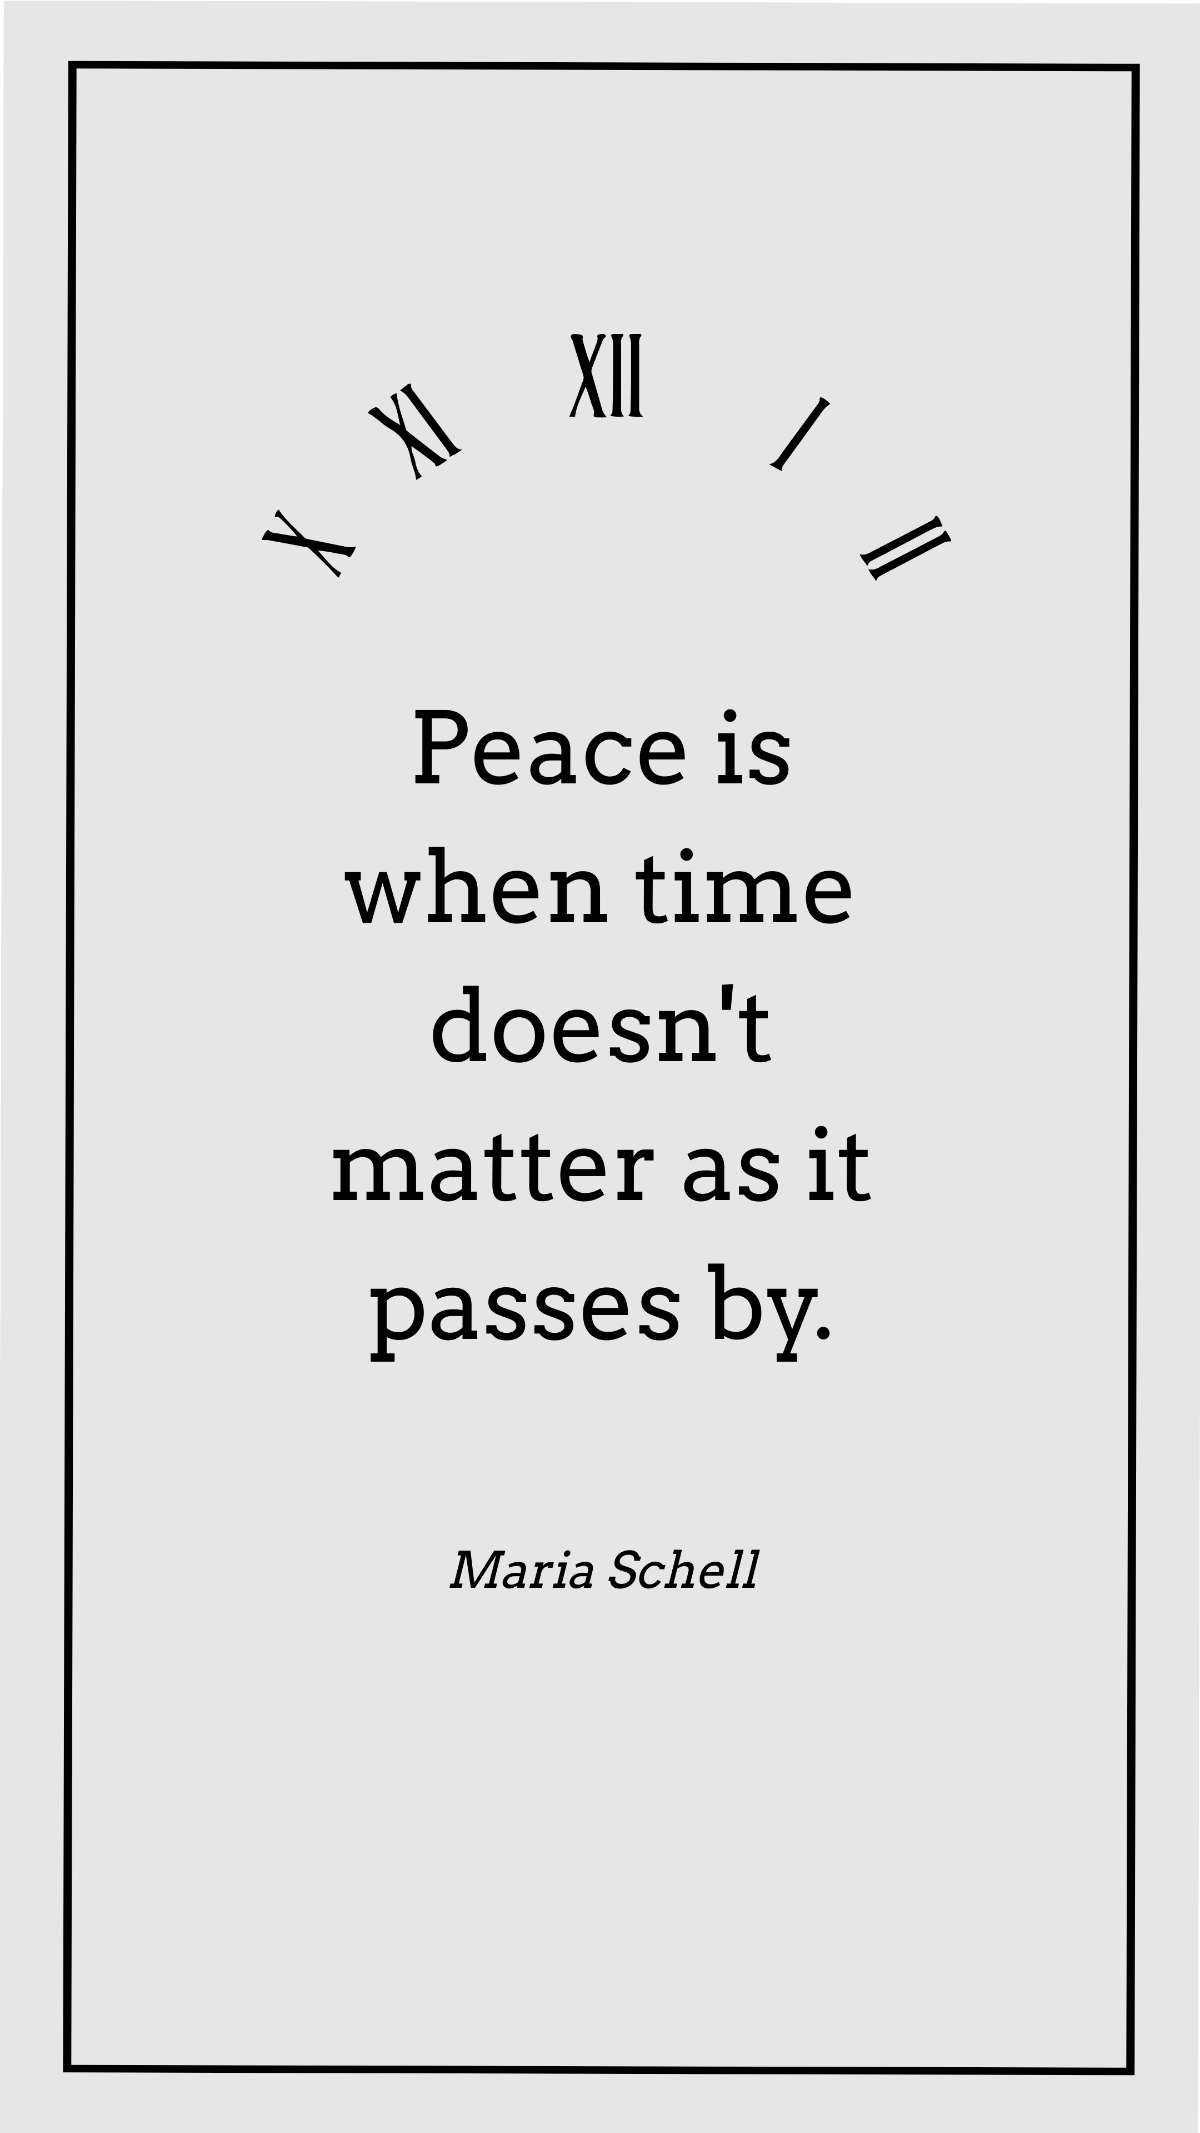 Maria Schell - Peace is when time doesn't matter as it passes by.